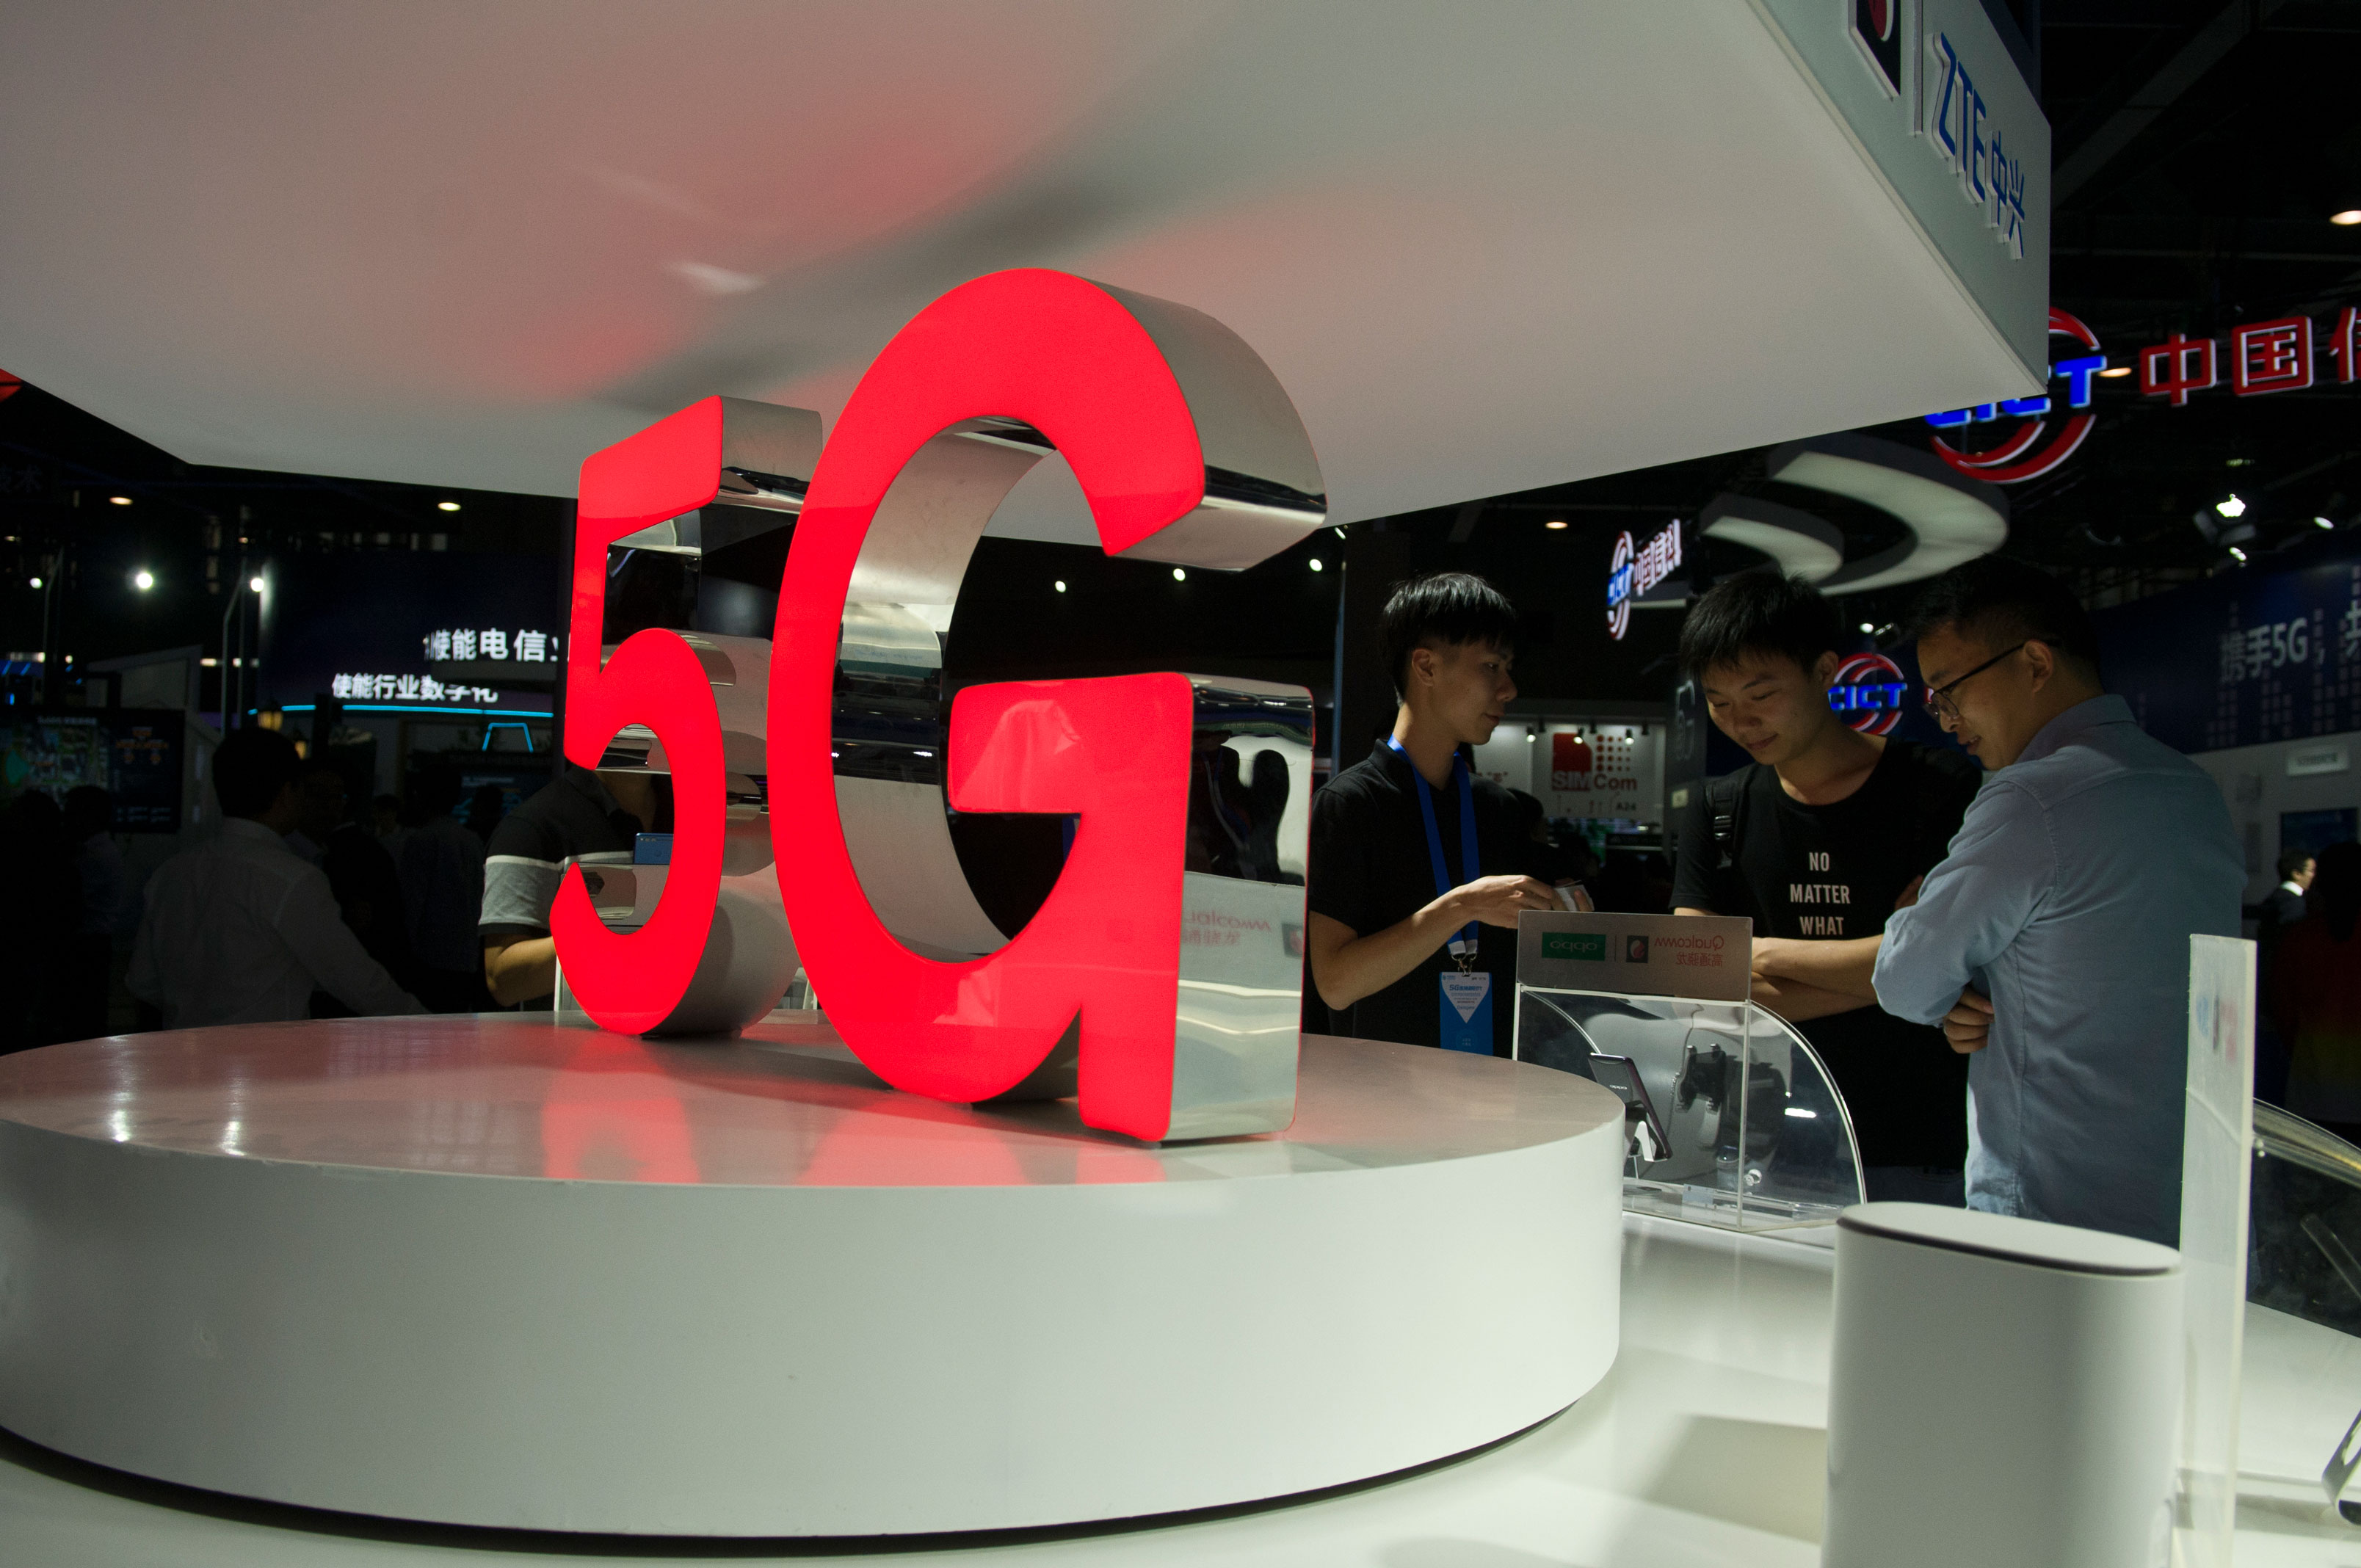 Attendees look at 5G mobile phones at the Qualcomm stand during China Mobile Global Partner Conference 2018 at Poly World Trade Center Exhibition Hall on December 6, 2018 in Guangzhou, Guangdong Province of China.